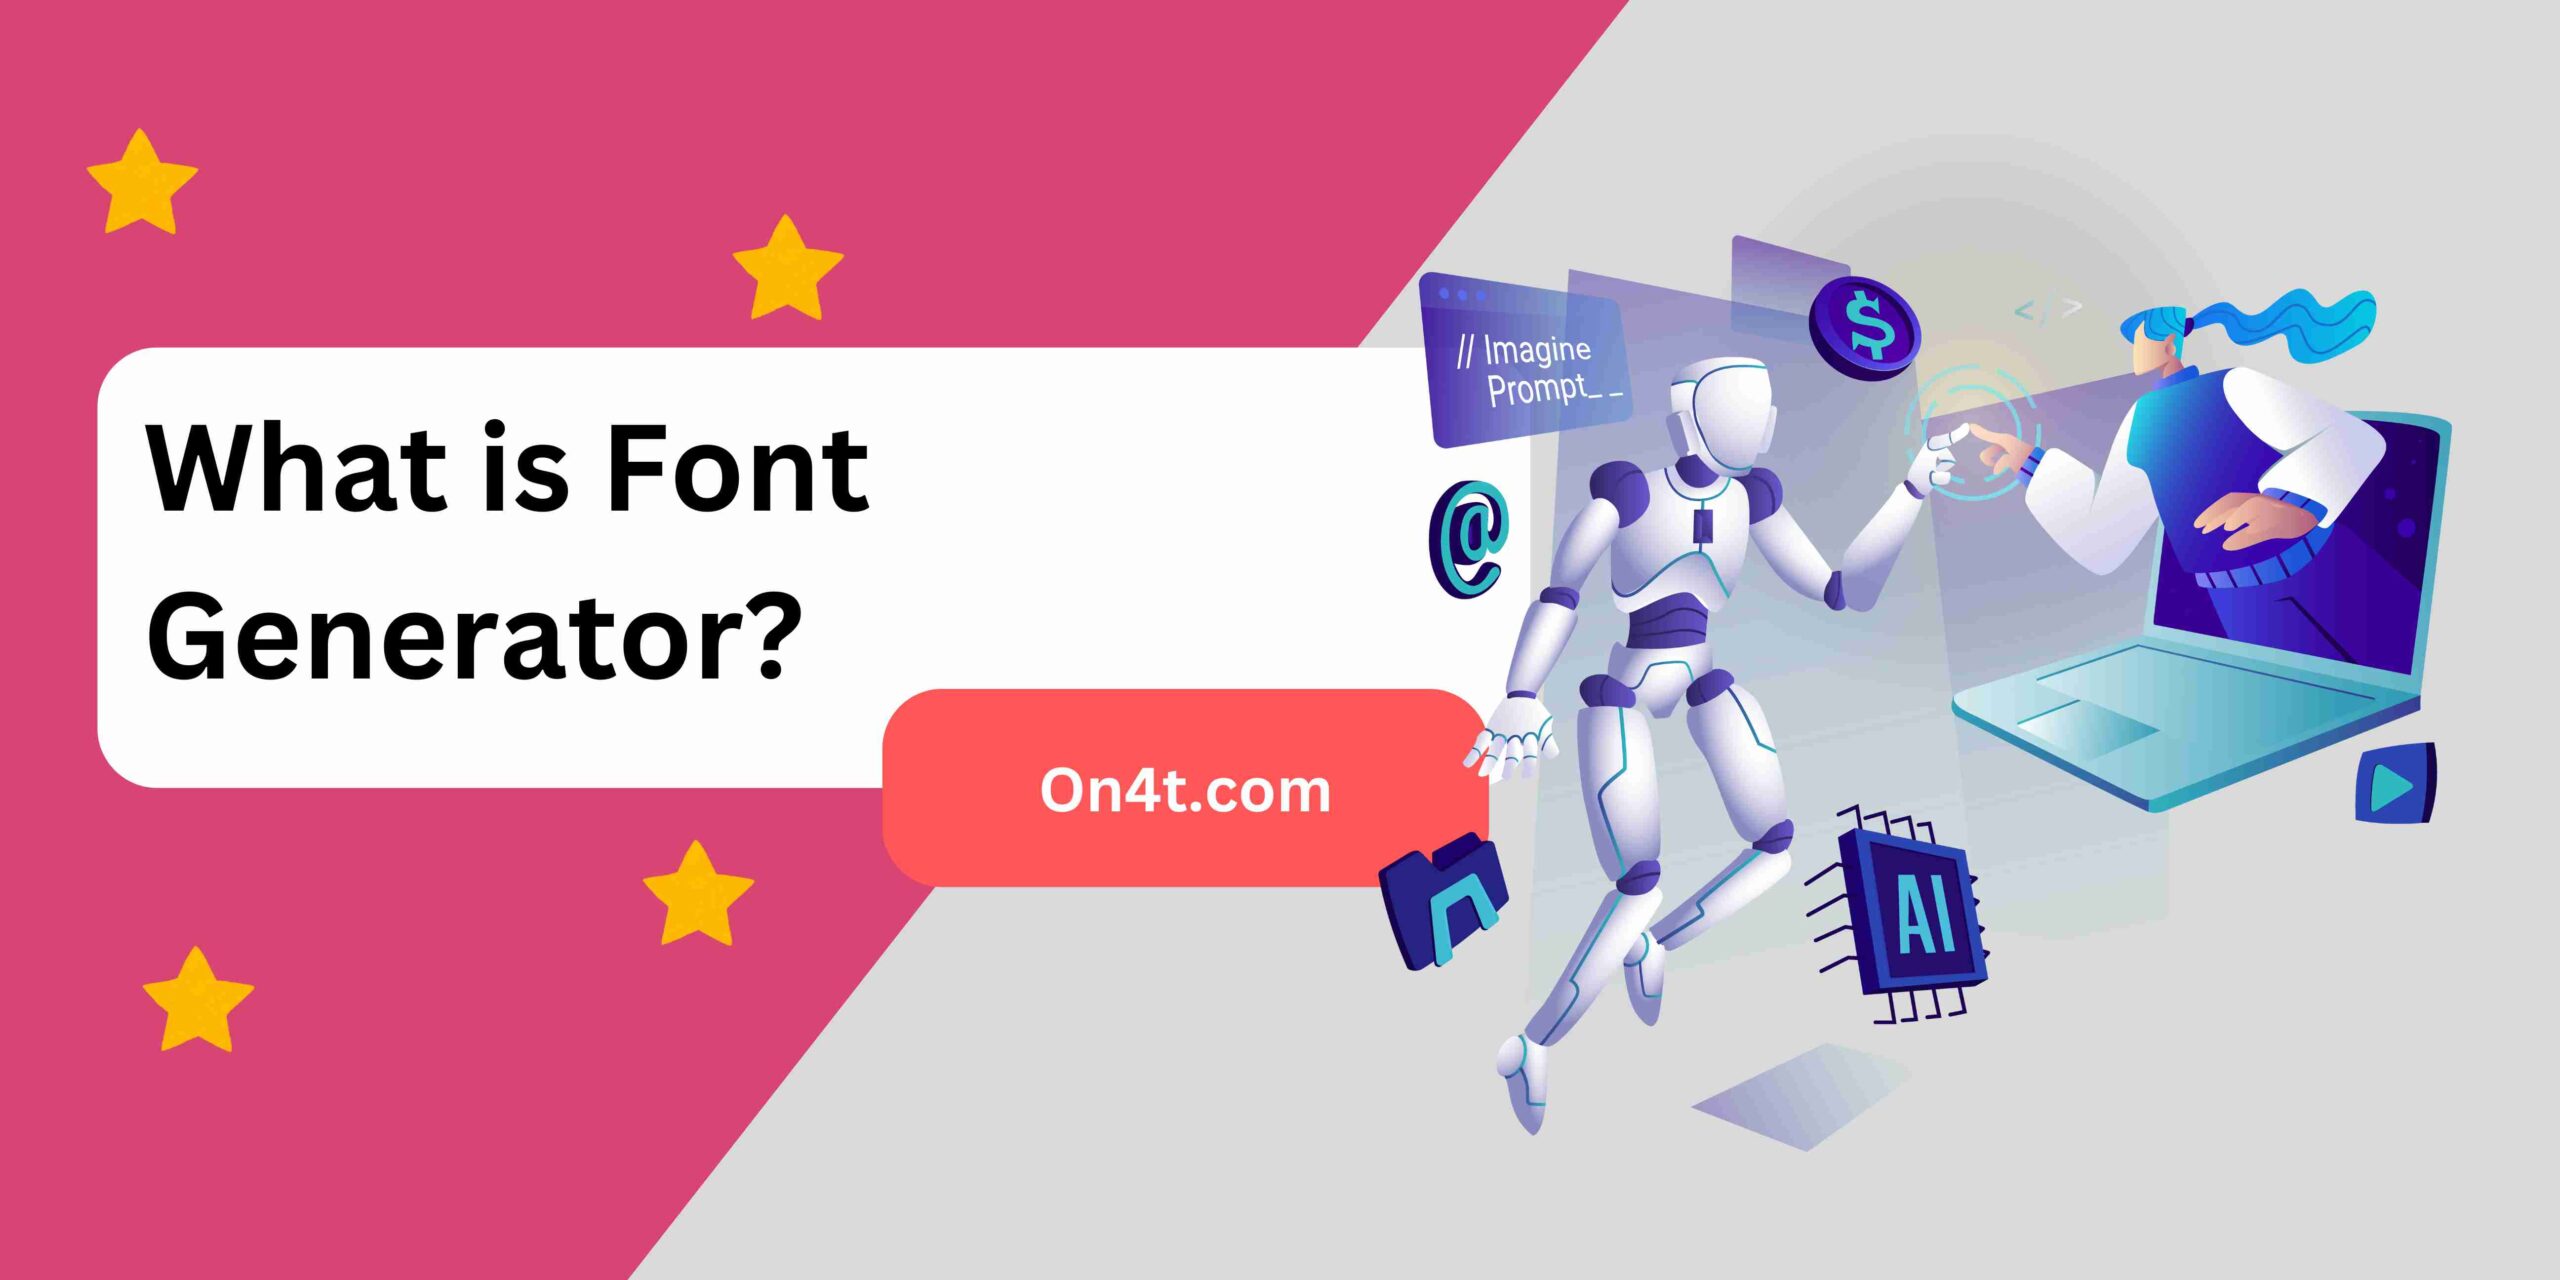 What is Font Generator?